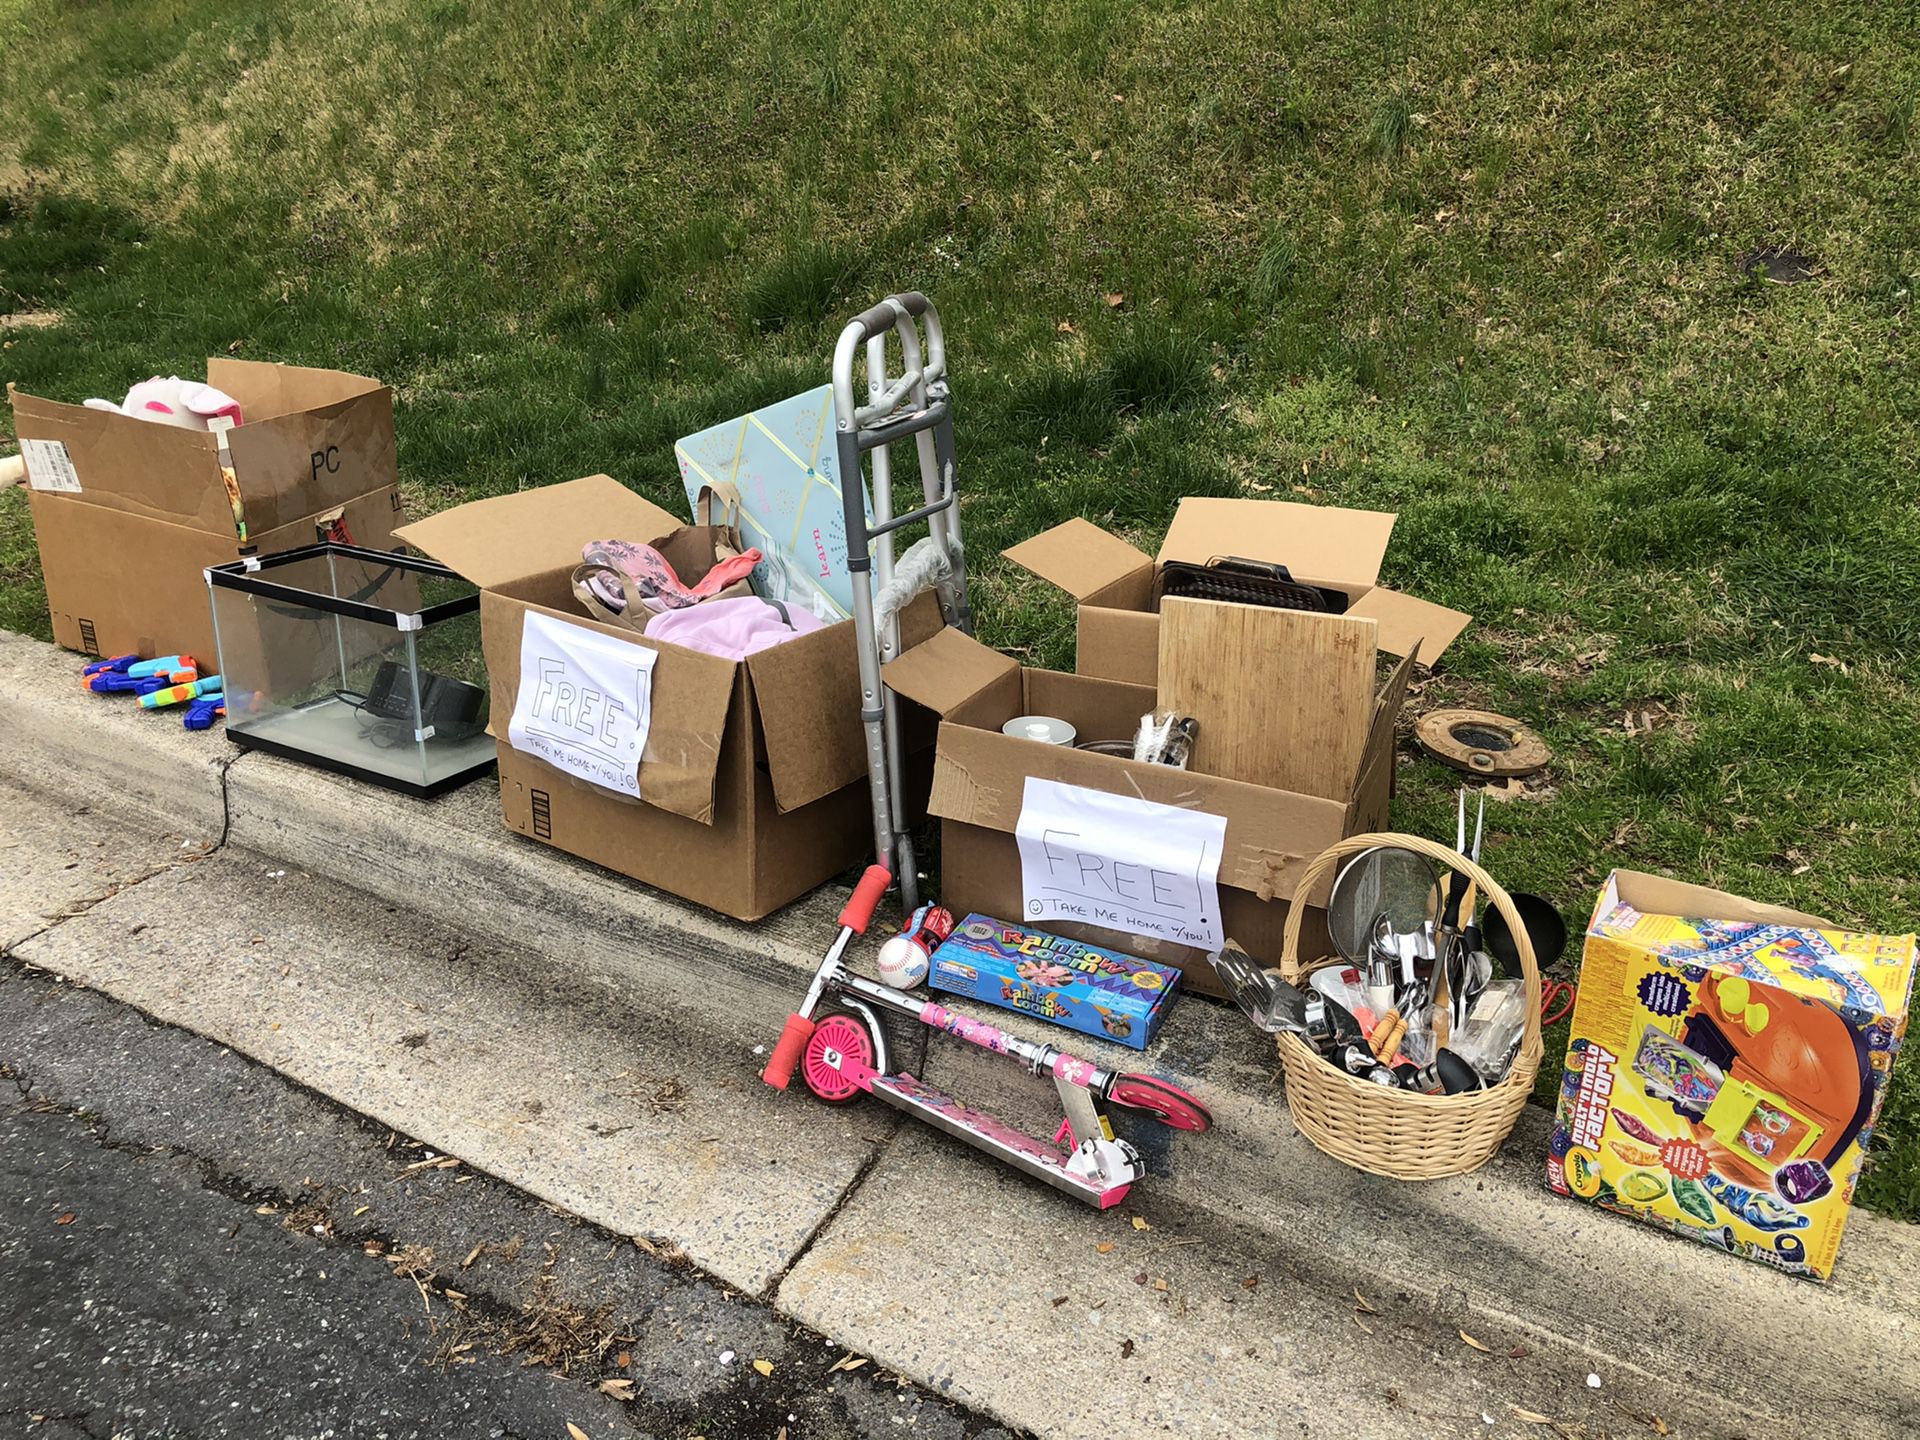 FREE - Curb Alert - Free Items! Toys - Scooter - Girls Clothes (8-12) - Walker - Basket - Vase - Clock Radio - Aquarium - Kitchen Items - And More!!